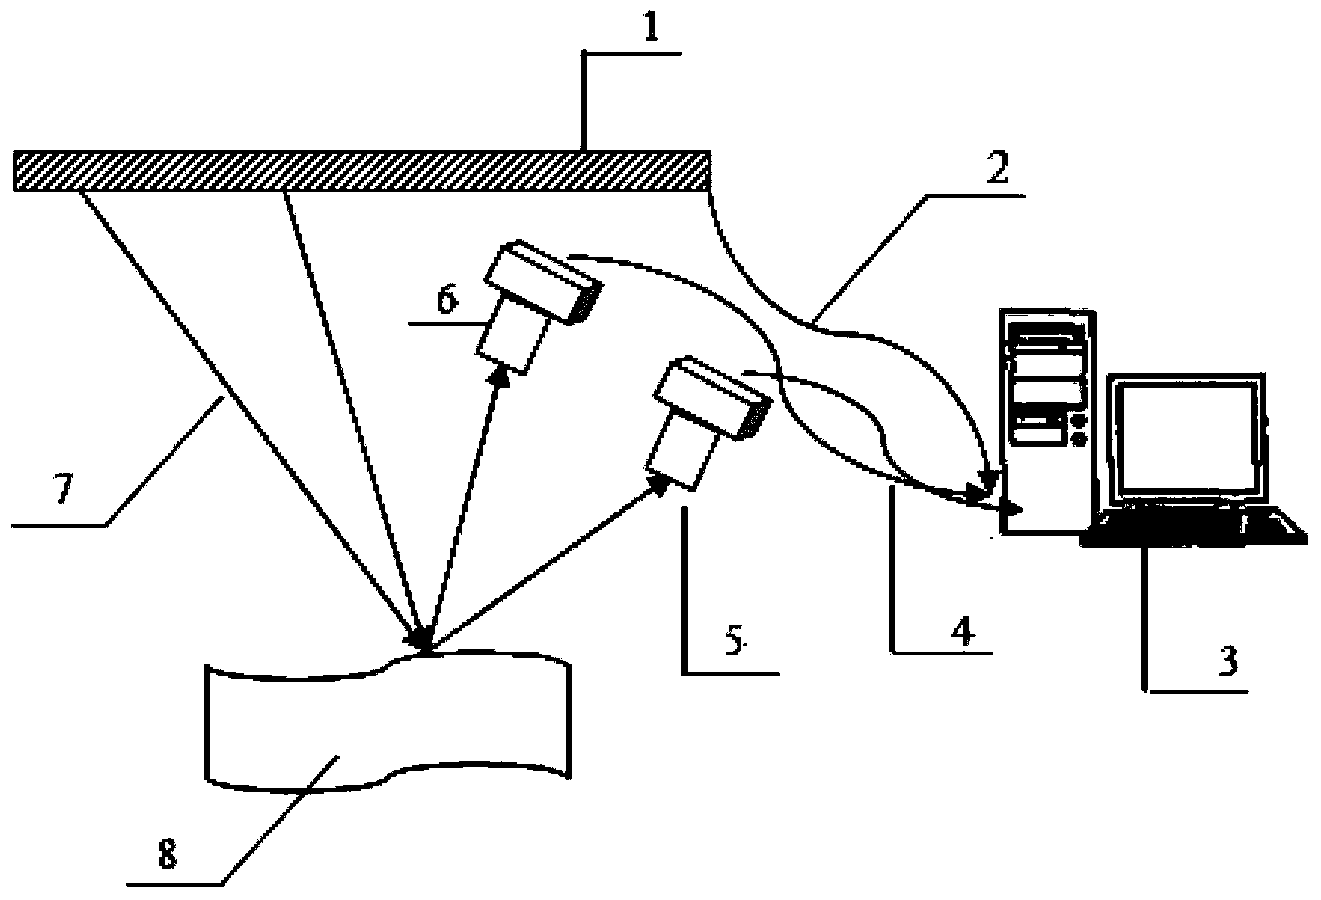 Mirror object measuring device and method based on binocular vision